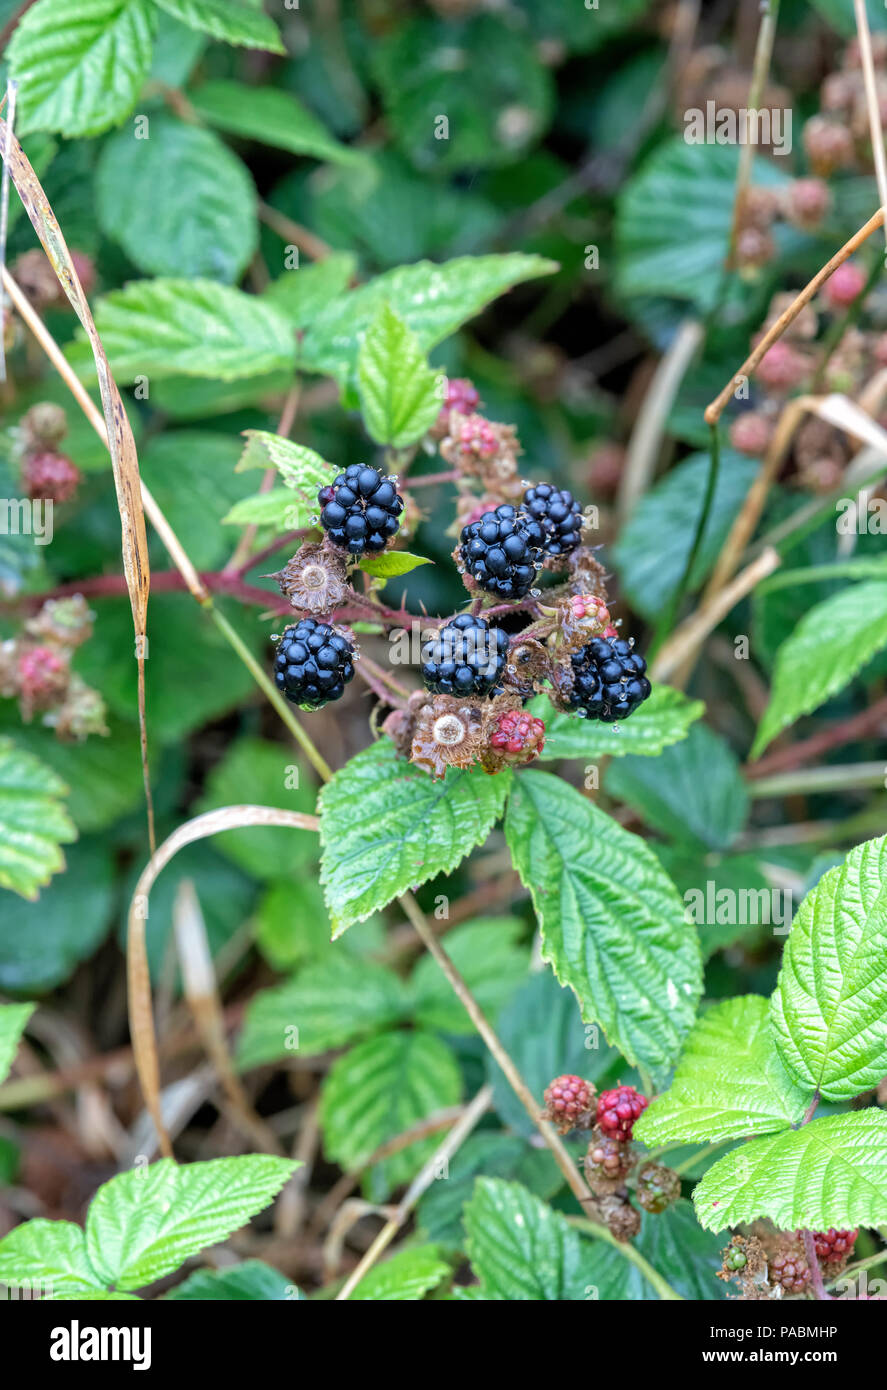 Blackberries ripening on a bramble plant in an English hedgerow Stock Photo